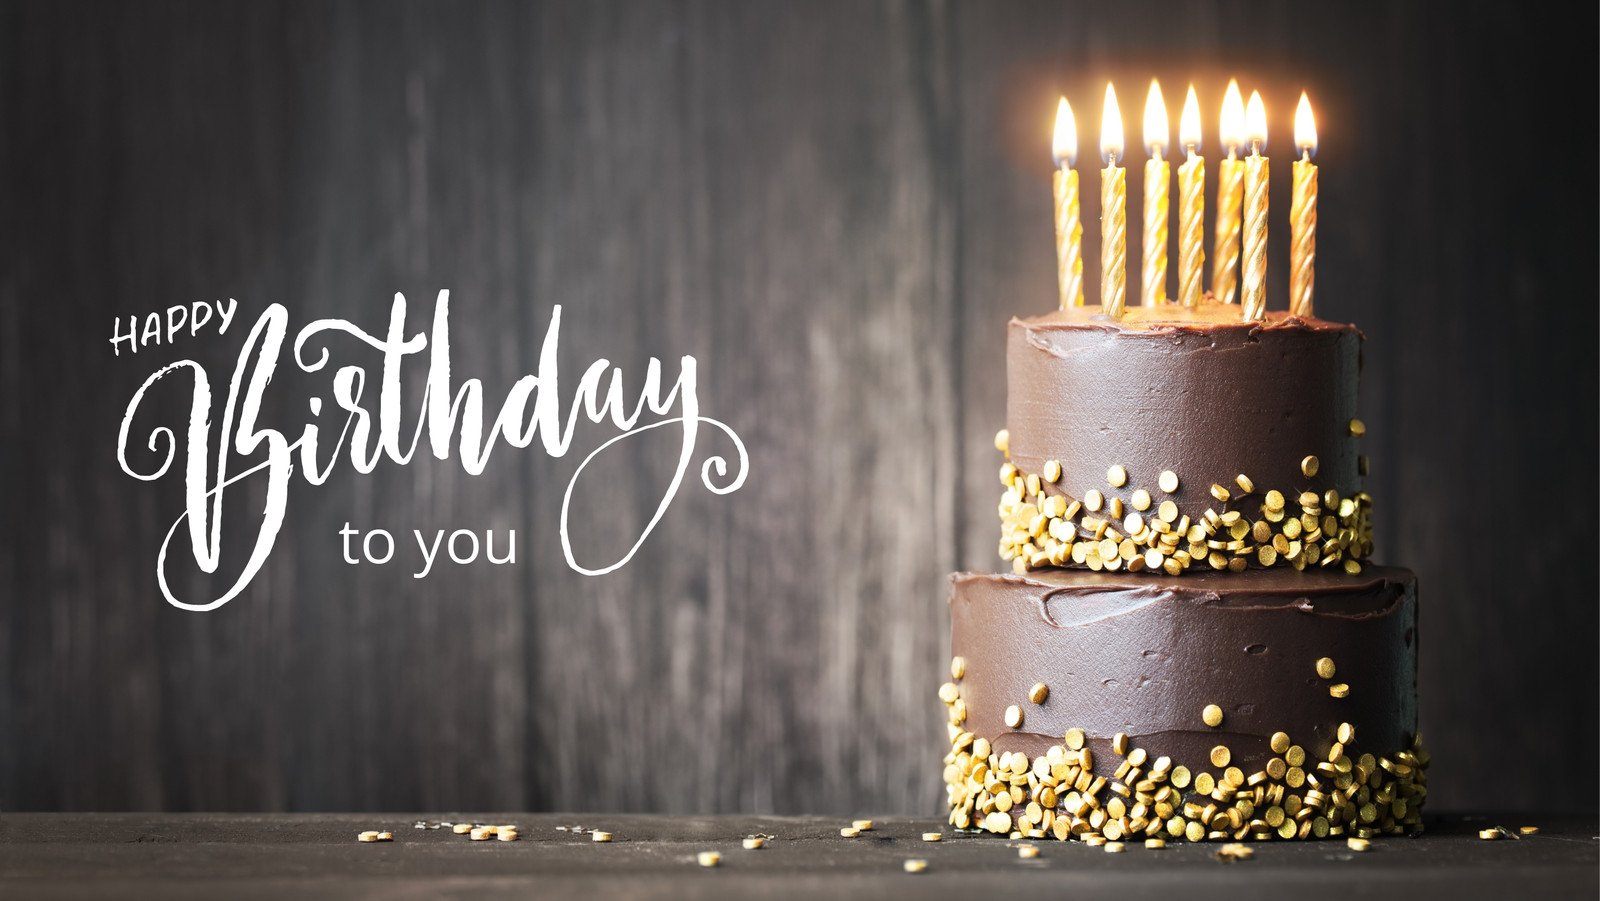 Page 13 - Free customizable birthday Facebook cover templates | Canva